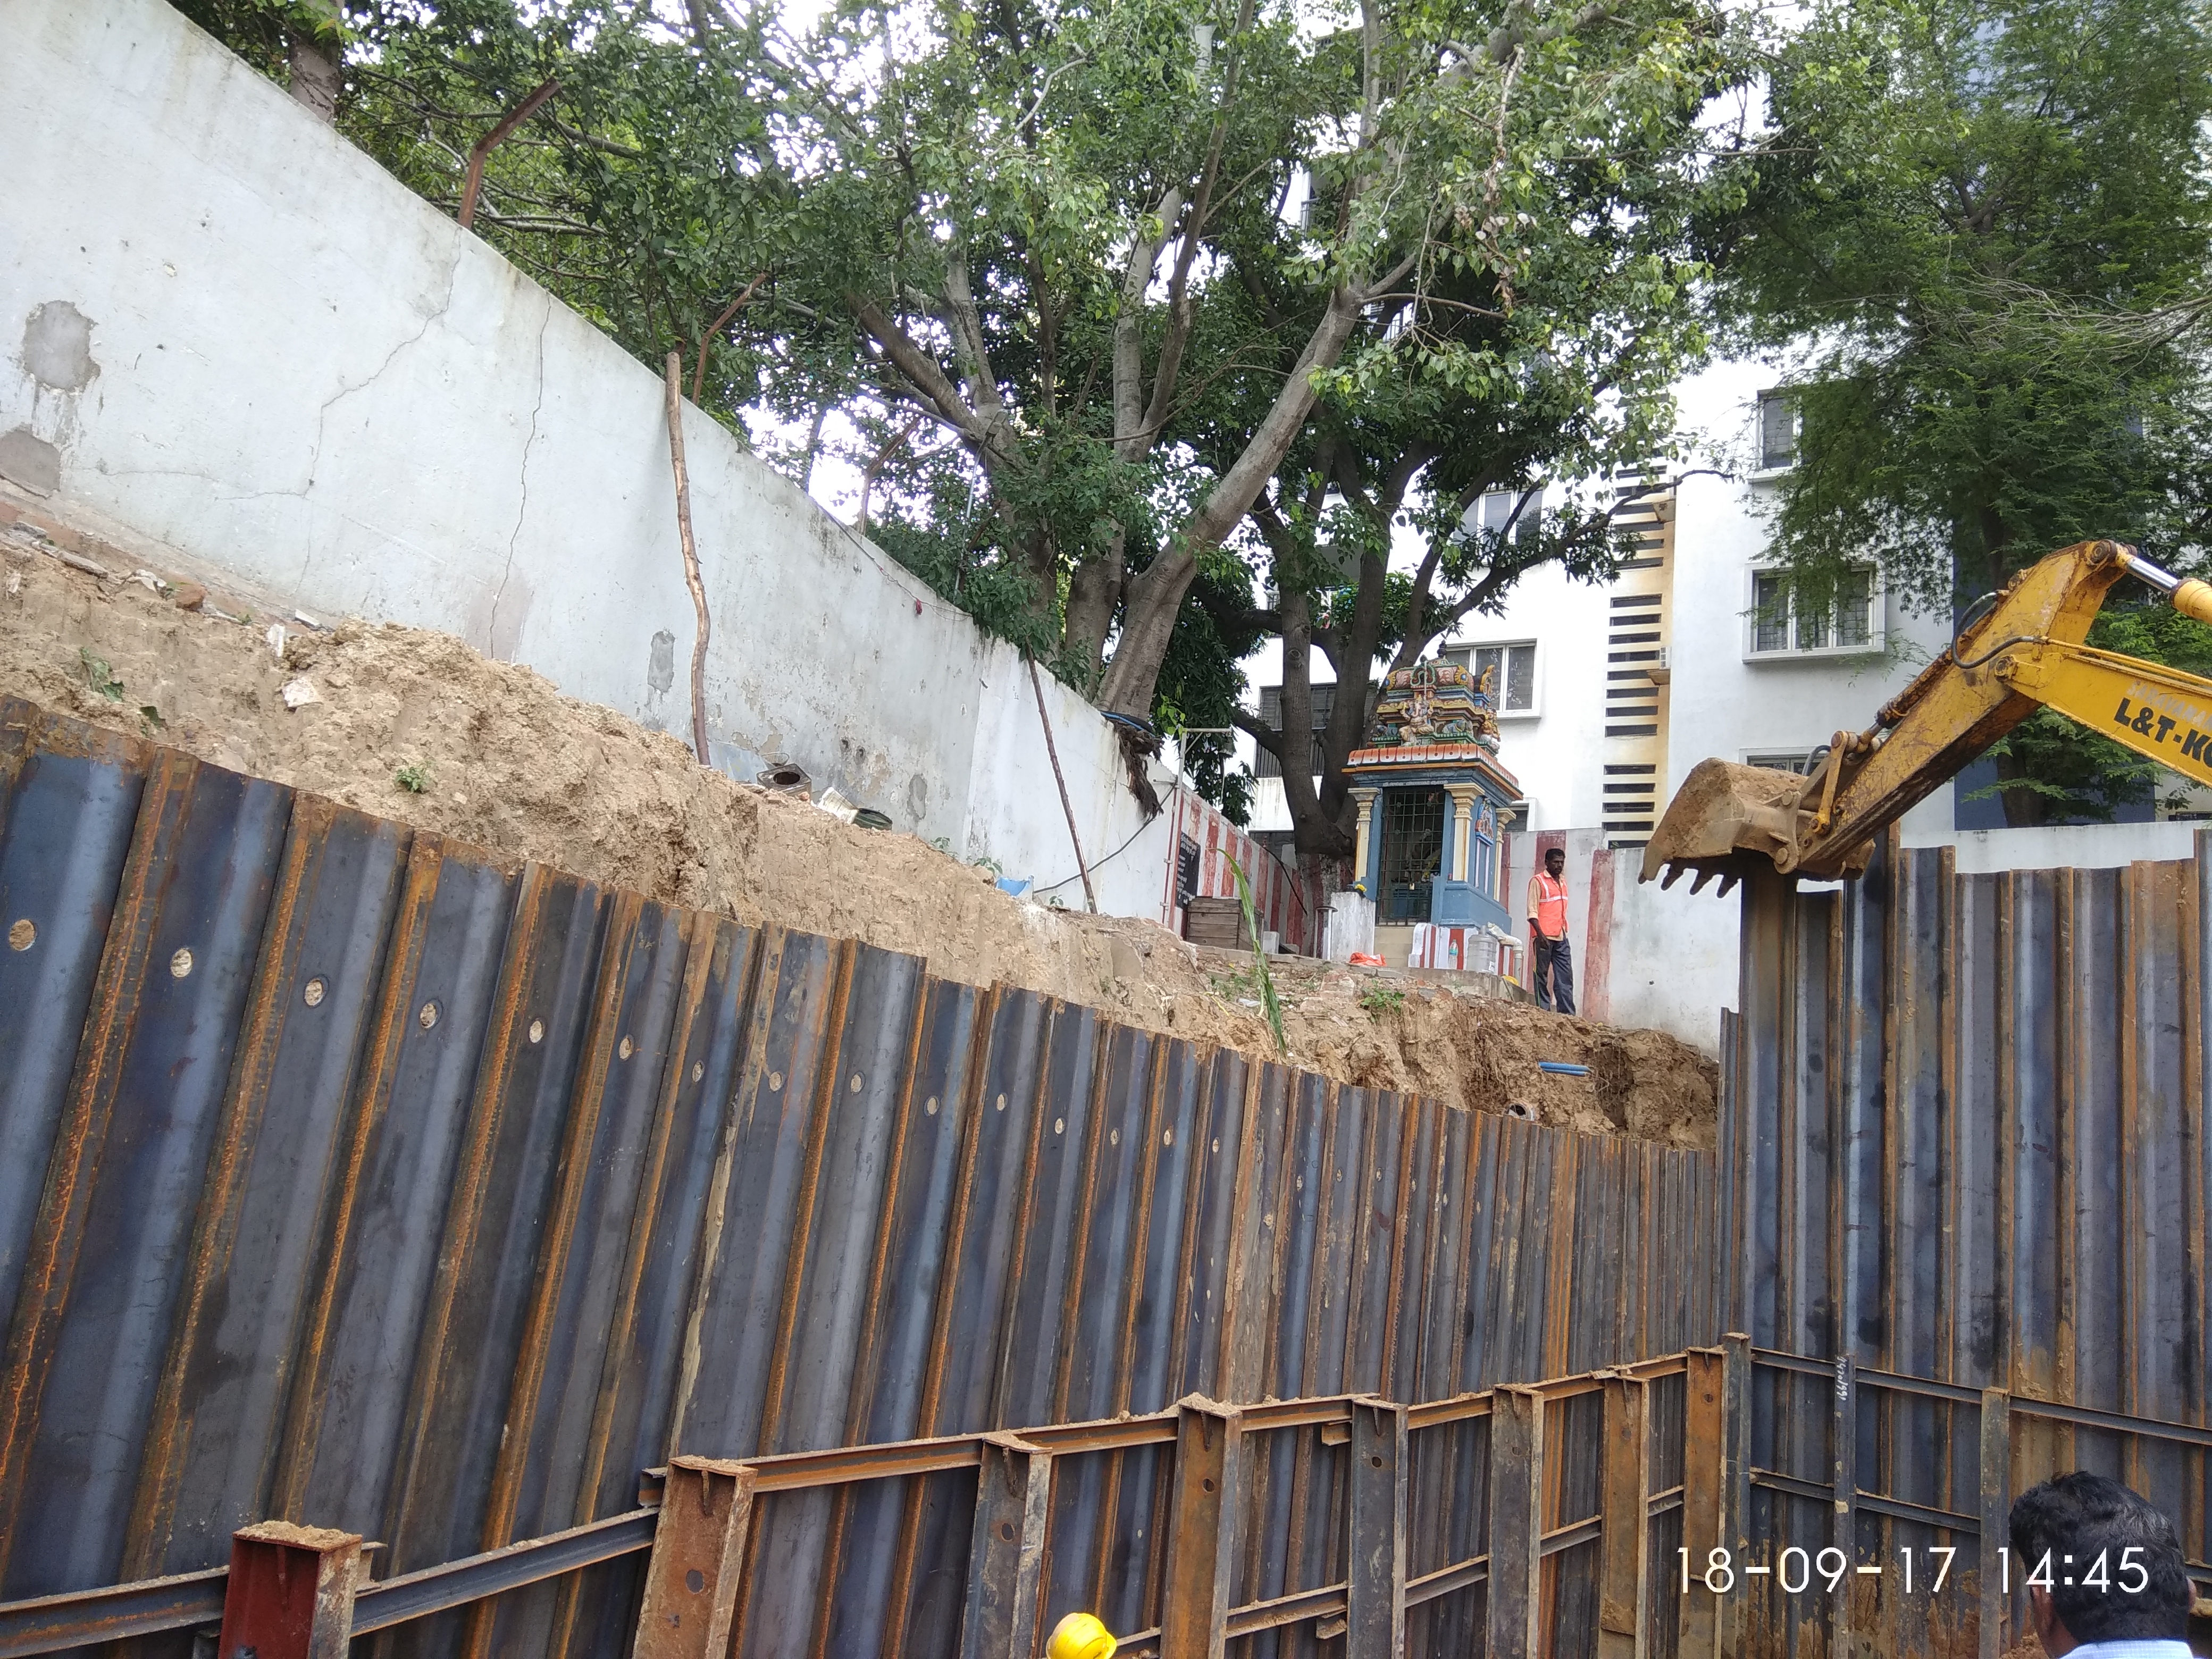  Shoring Contractors in Chennai